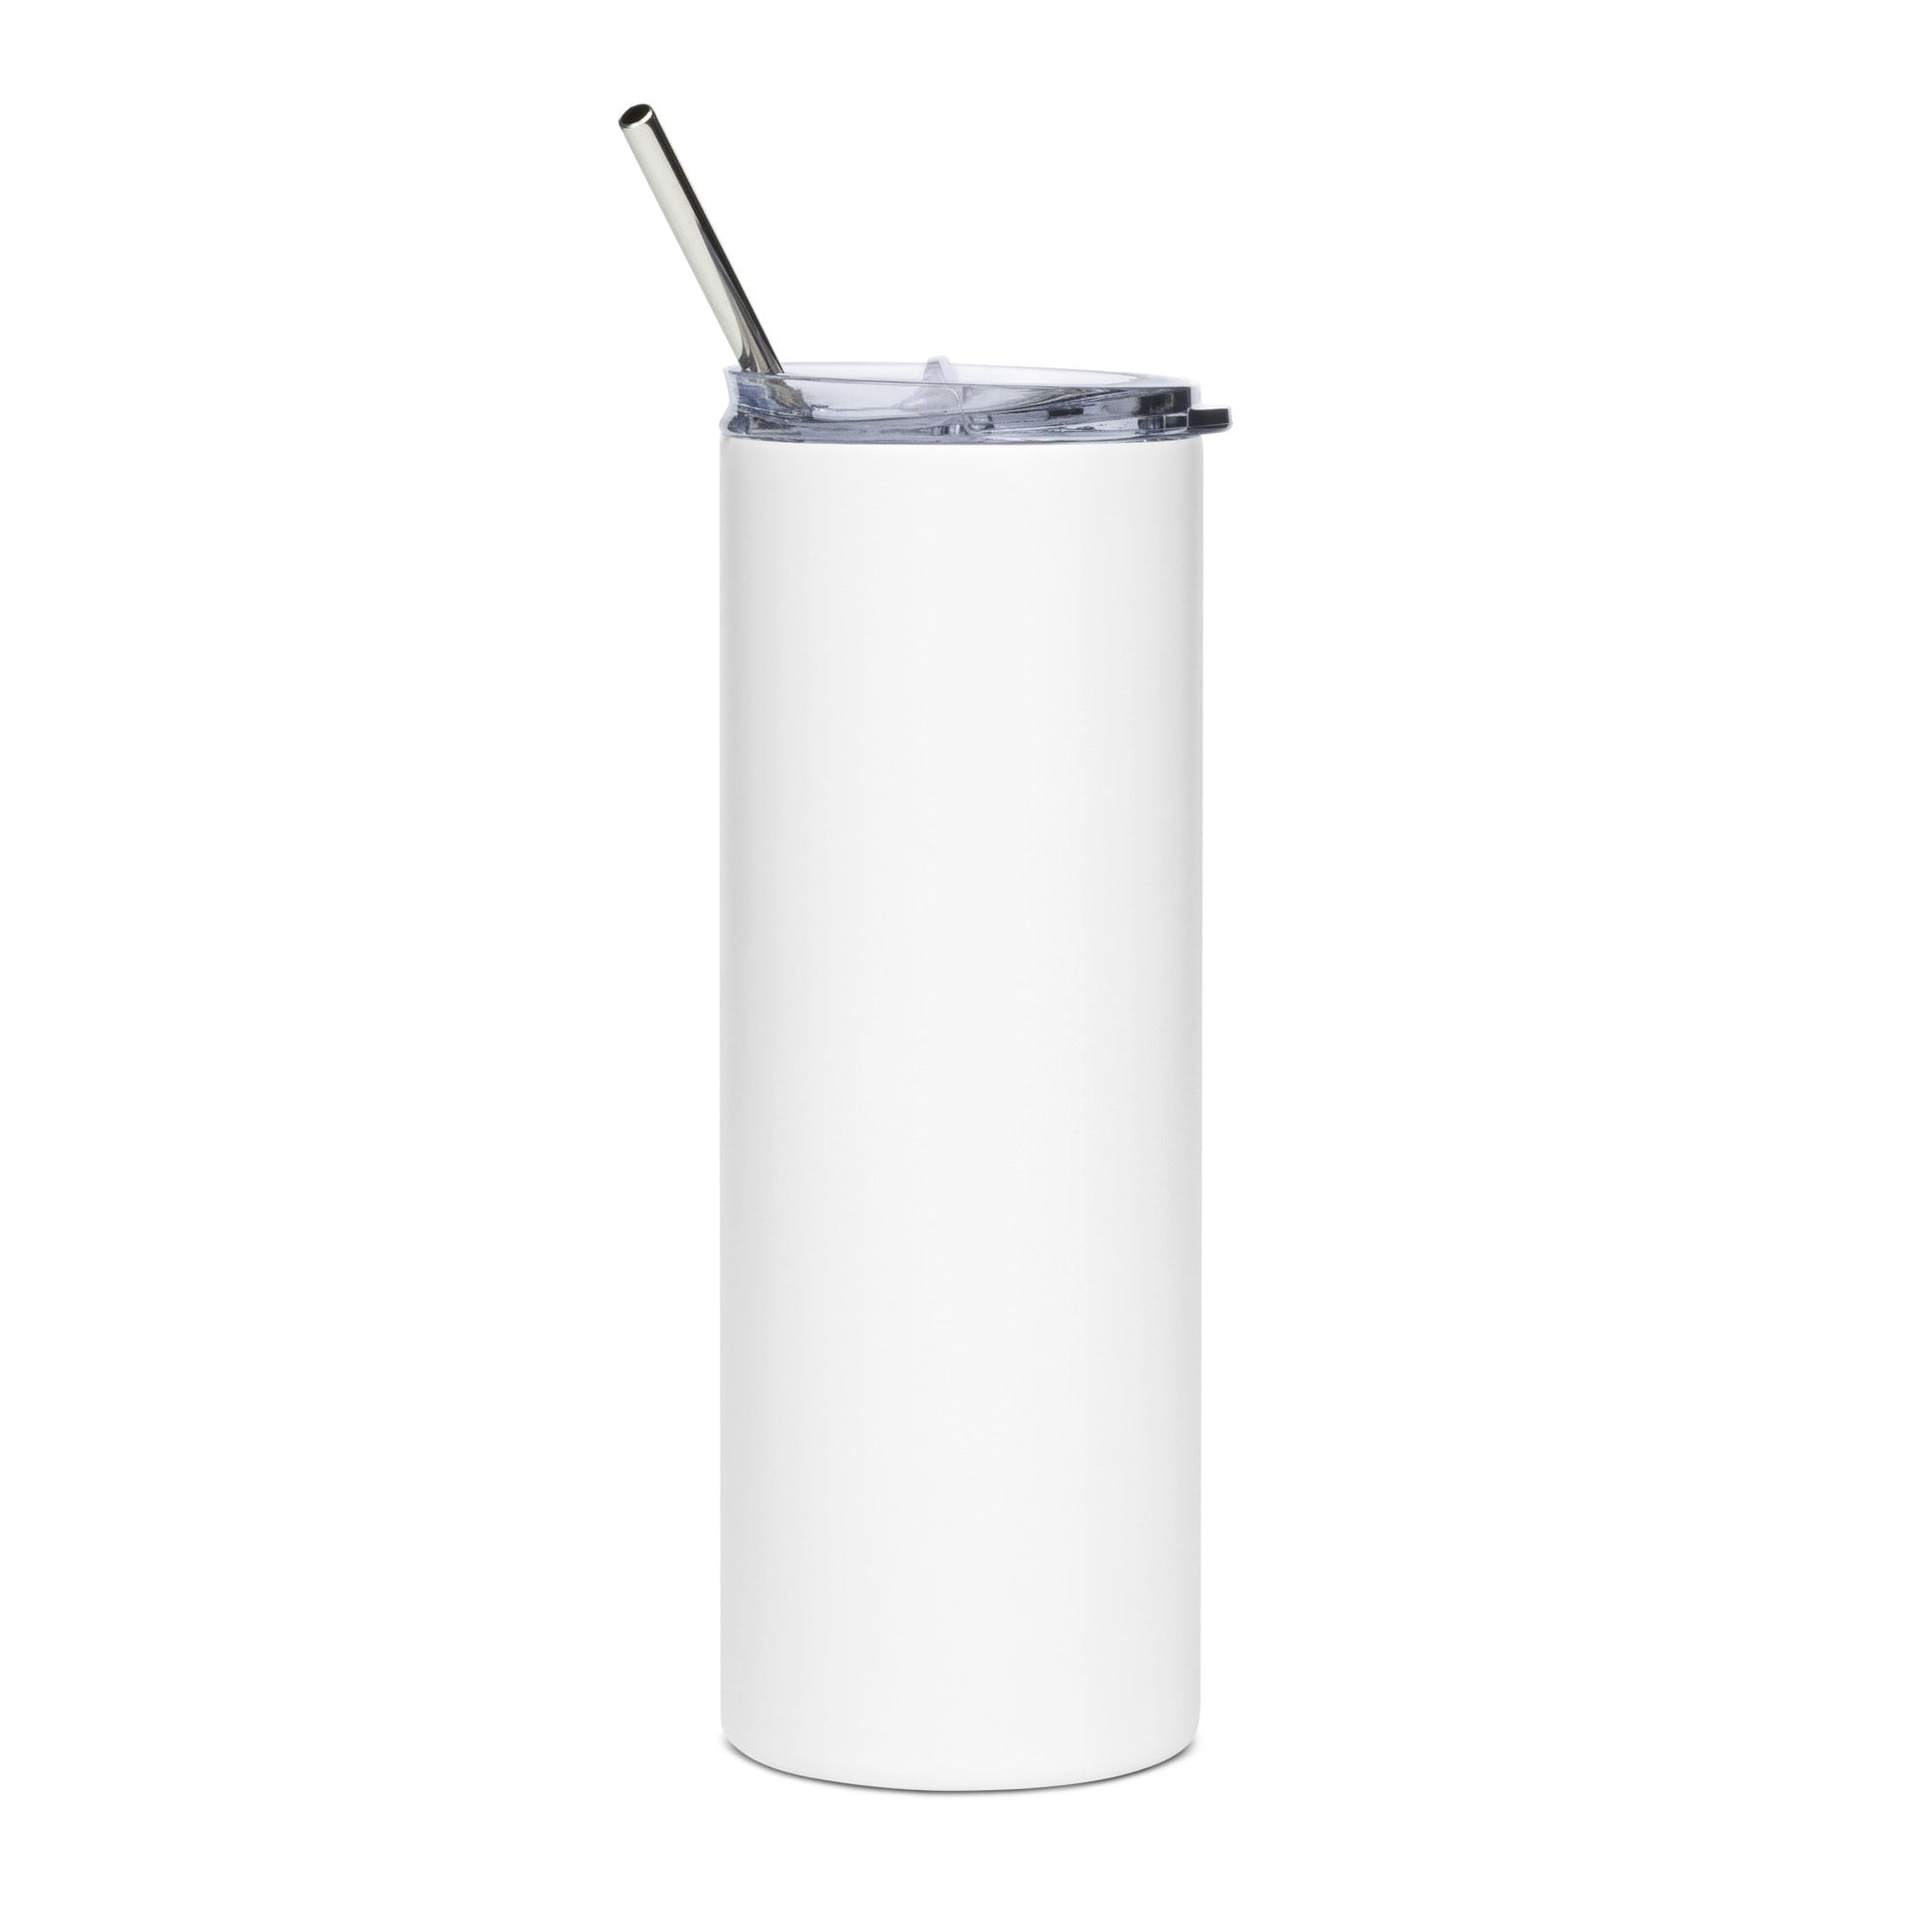 Sunzout Stainless steel tumbler - Sunzout Outdoor Spaces LLC